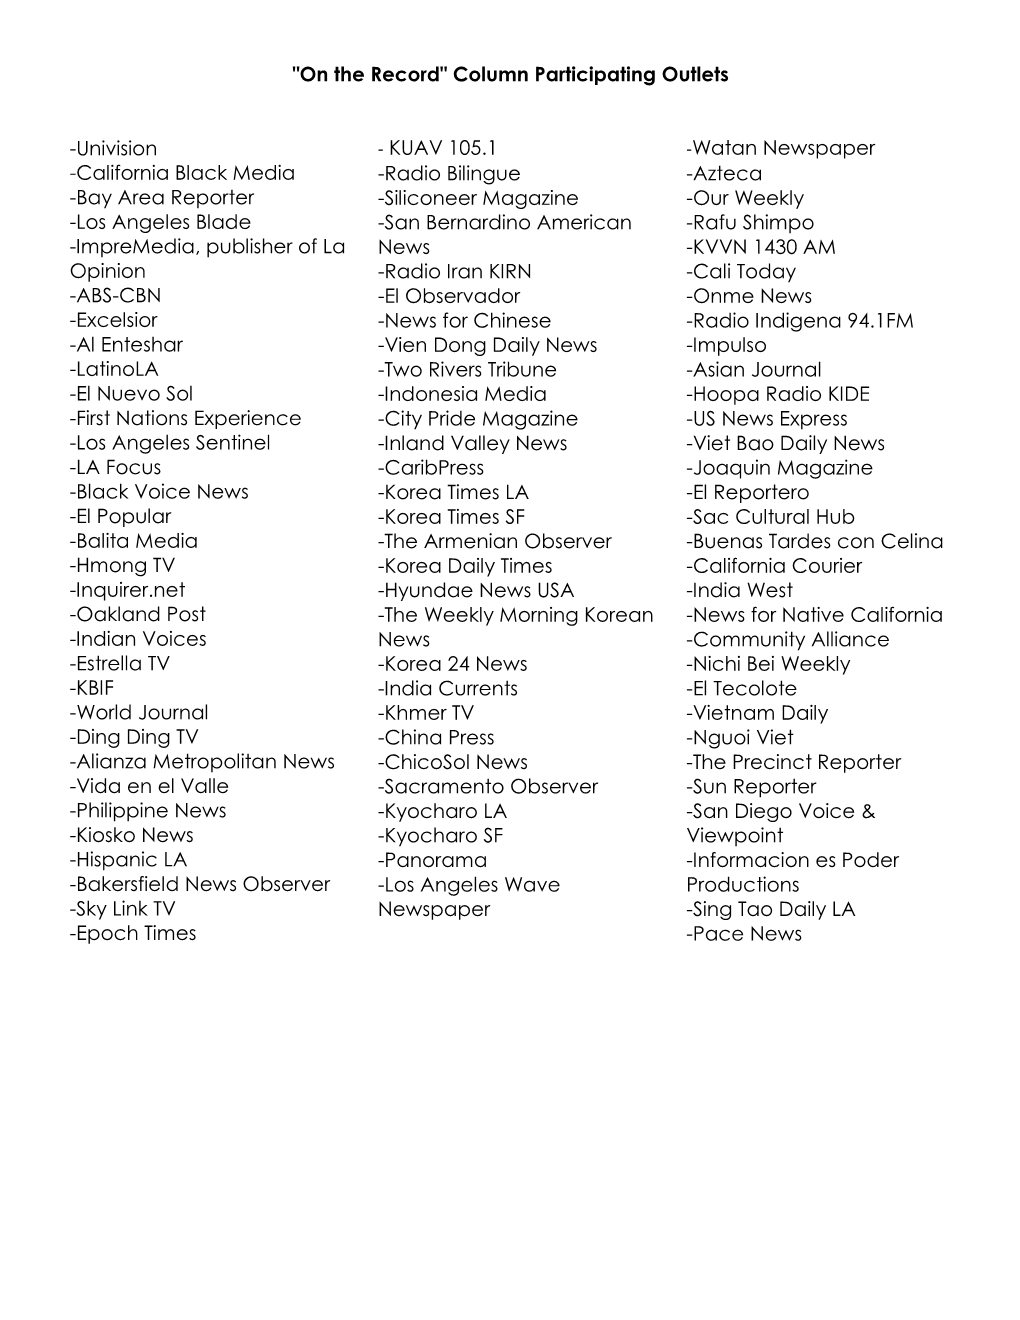 "On the Record" Participating Outlets